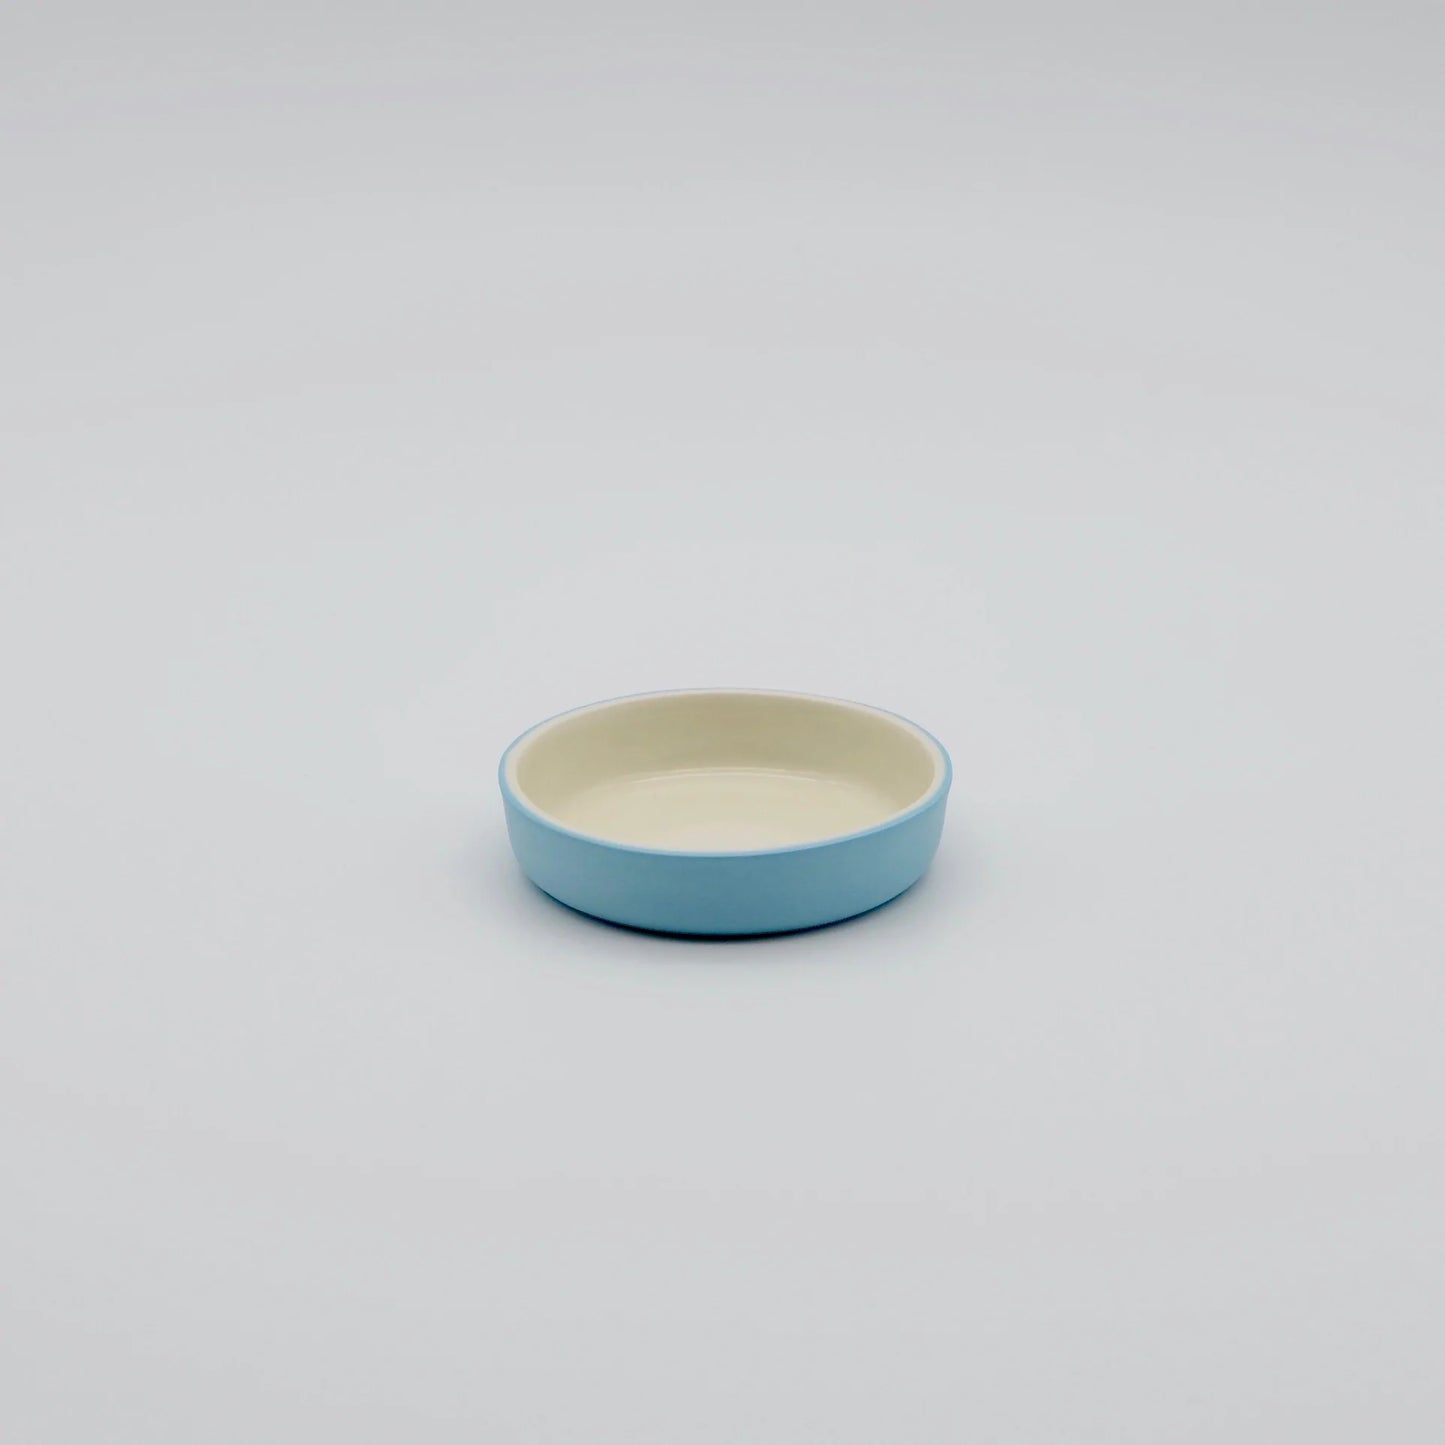 Dipping Bowl in Blue